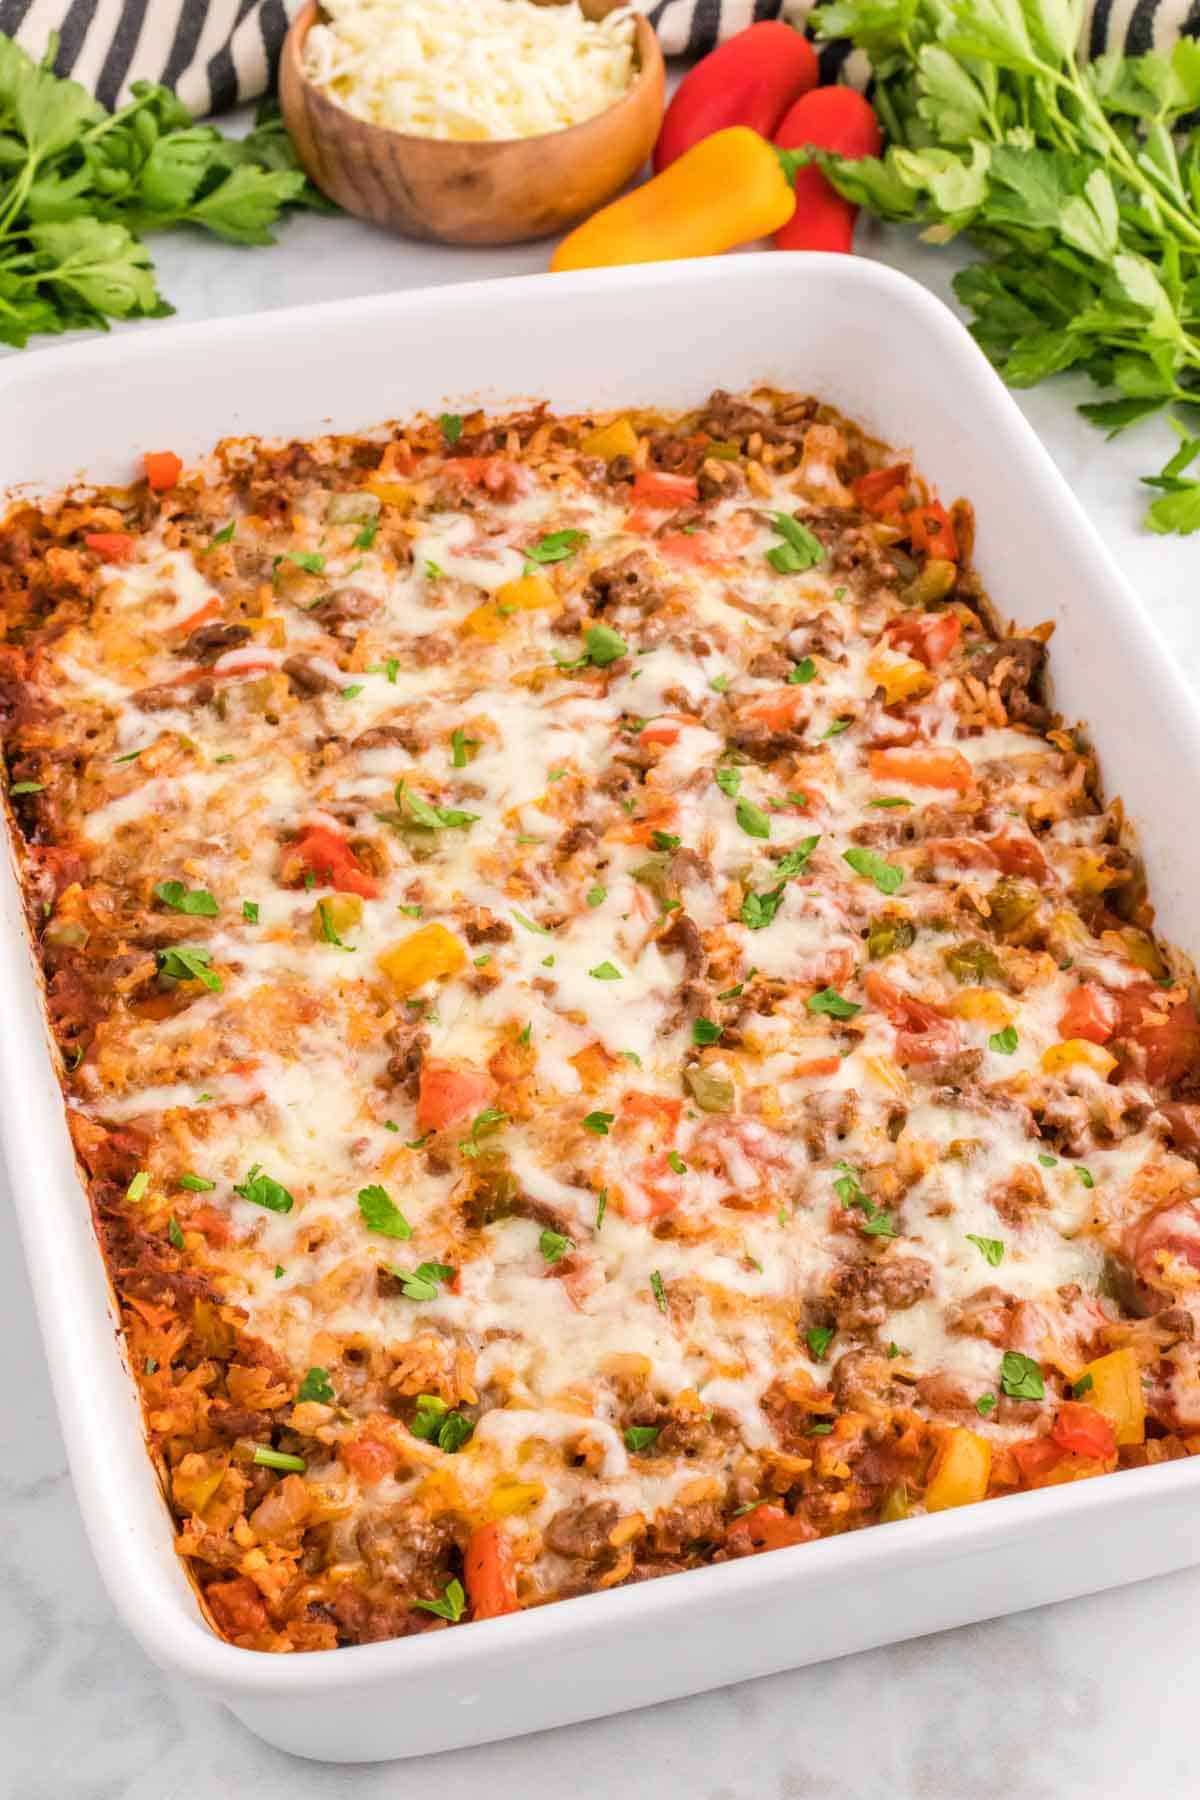 Stuffed Pepper Casserole is a hearty ground beef casserole loaded with diced bell peppers, white rice, diced tomatoes, tomato sauce and baked with mozzarella cheese on top.